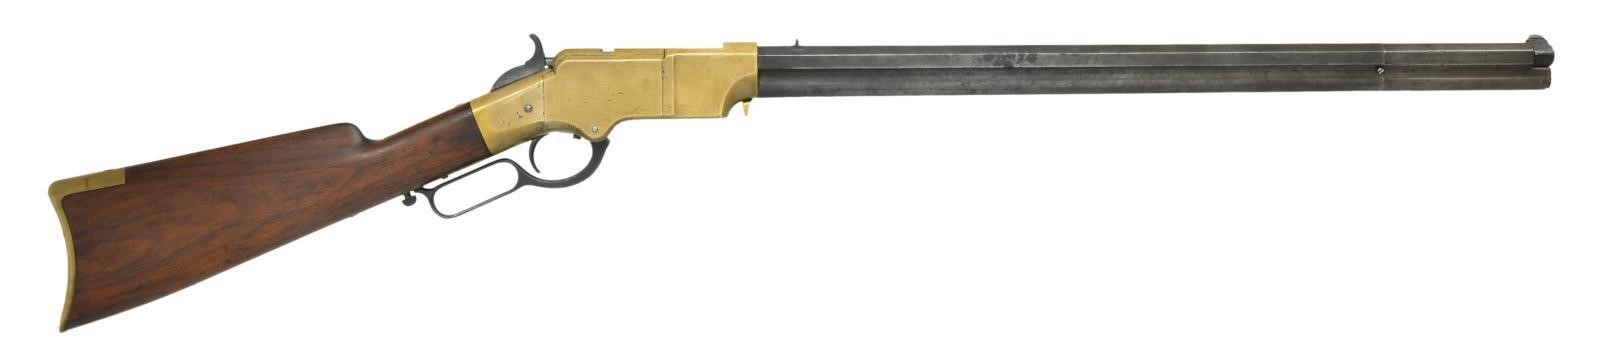 Spring 2019 Firearms Auction